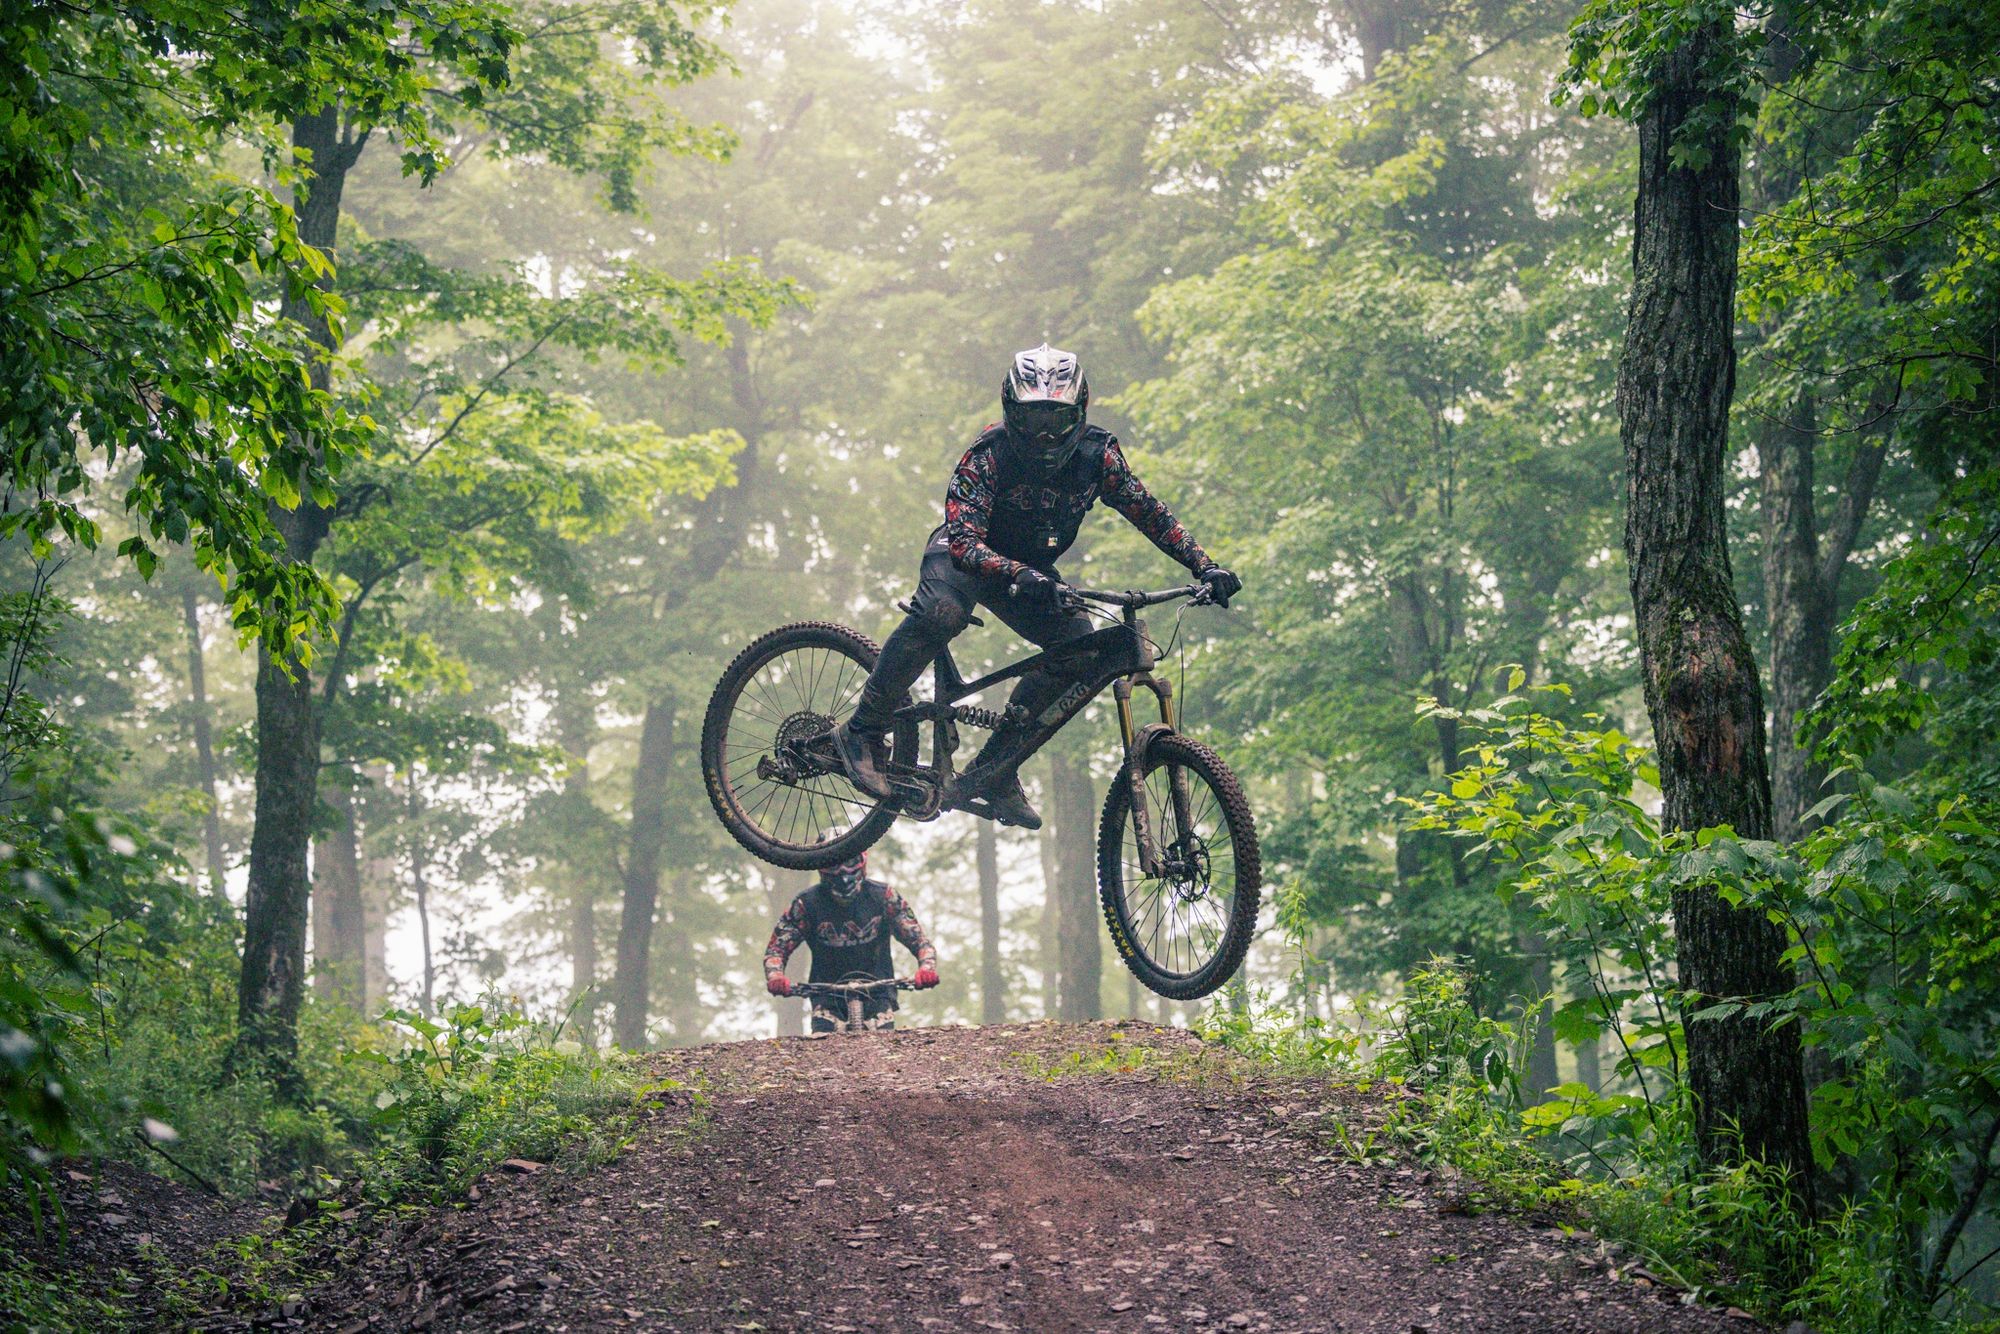 Unfortunately downhill mountain biking will no longer be offered at Windham after this season.  Photo courtesy of Windham Mountain Club.